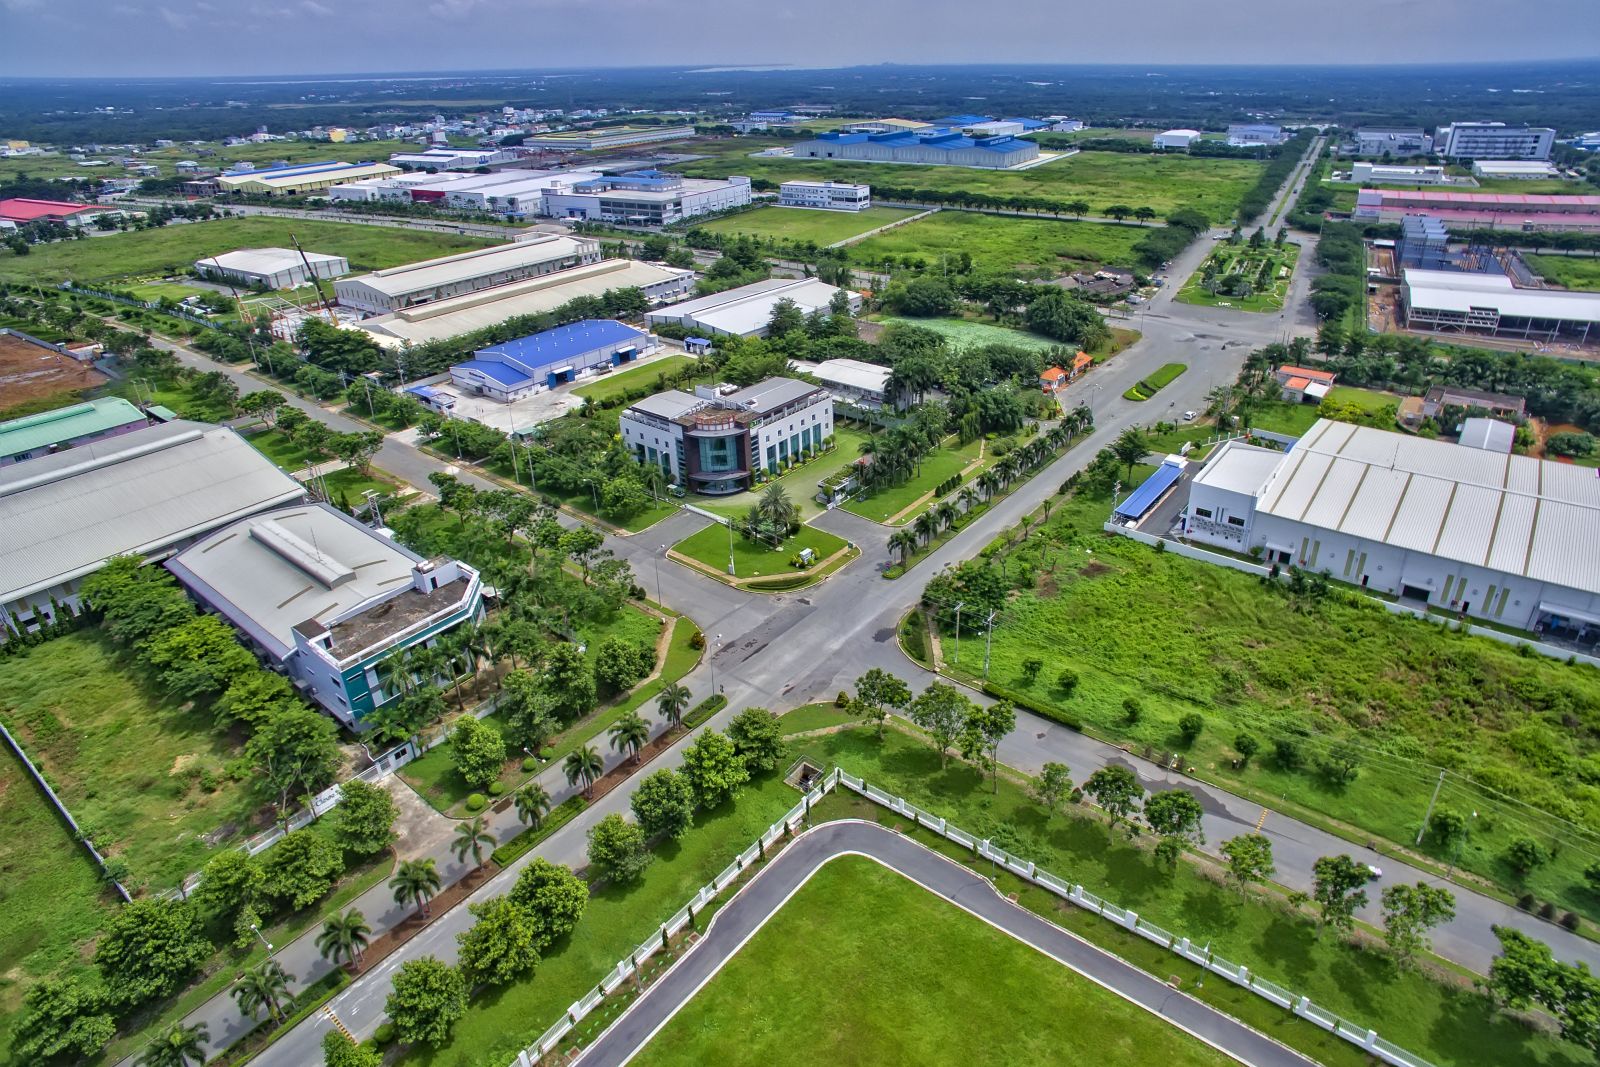 Foreign investors are seeking for industrial land in Vietnam. (Photo: cafef)